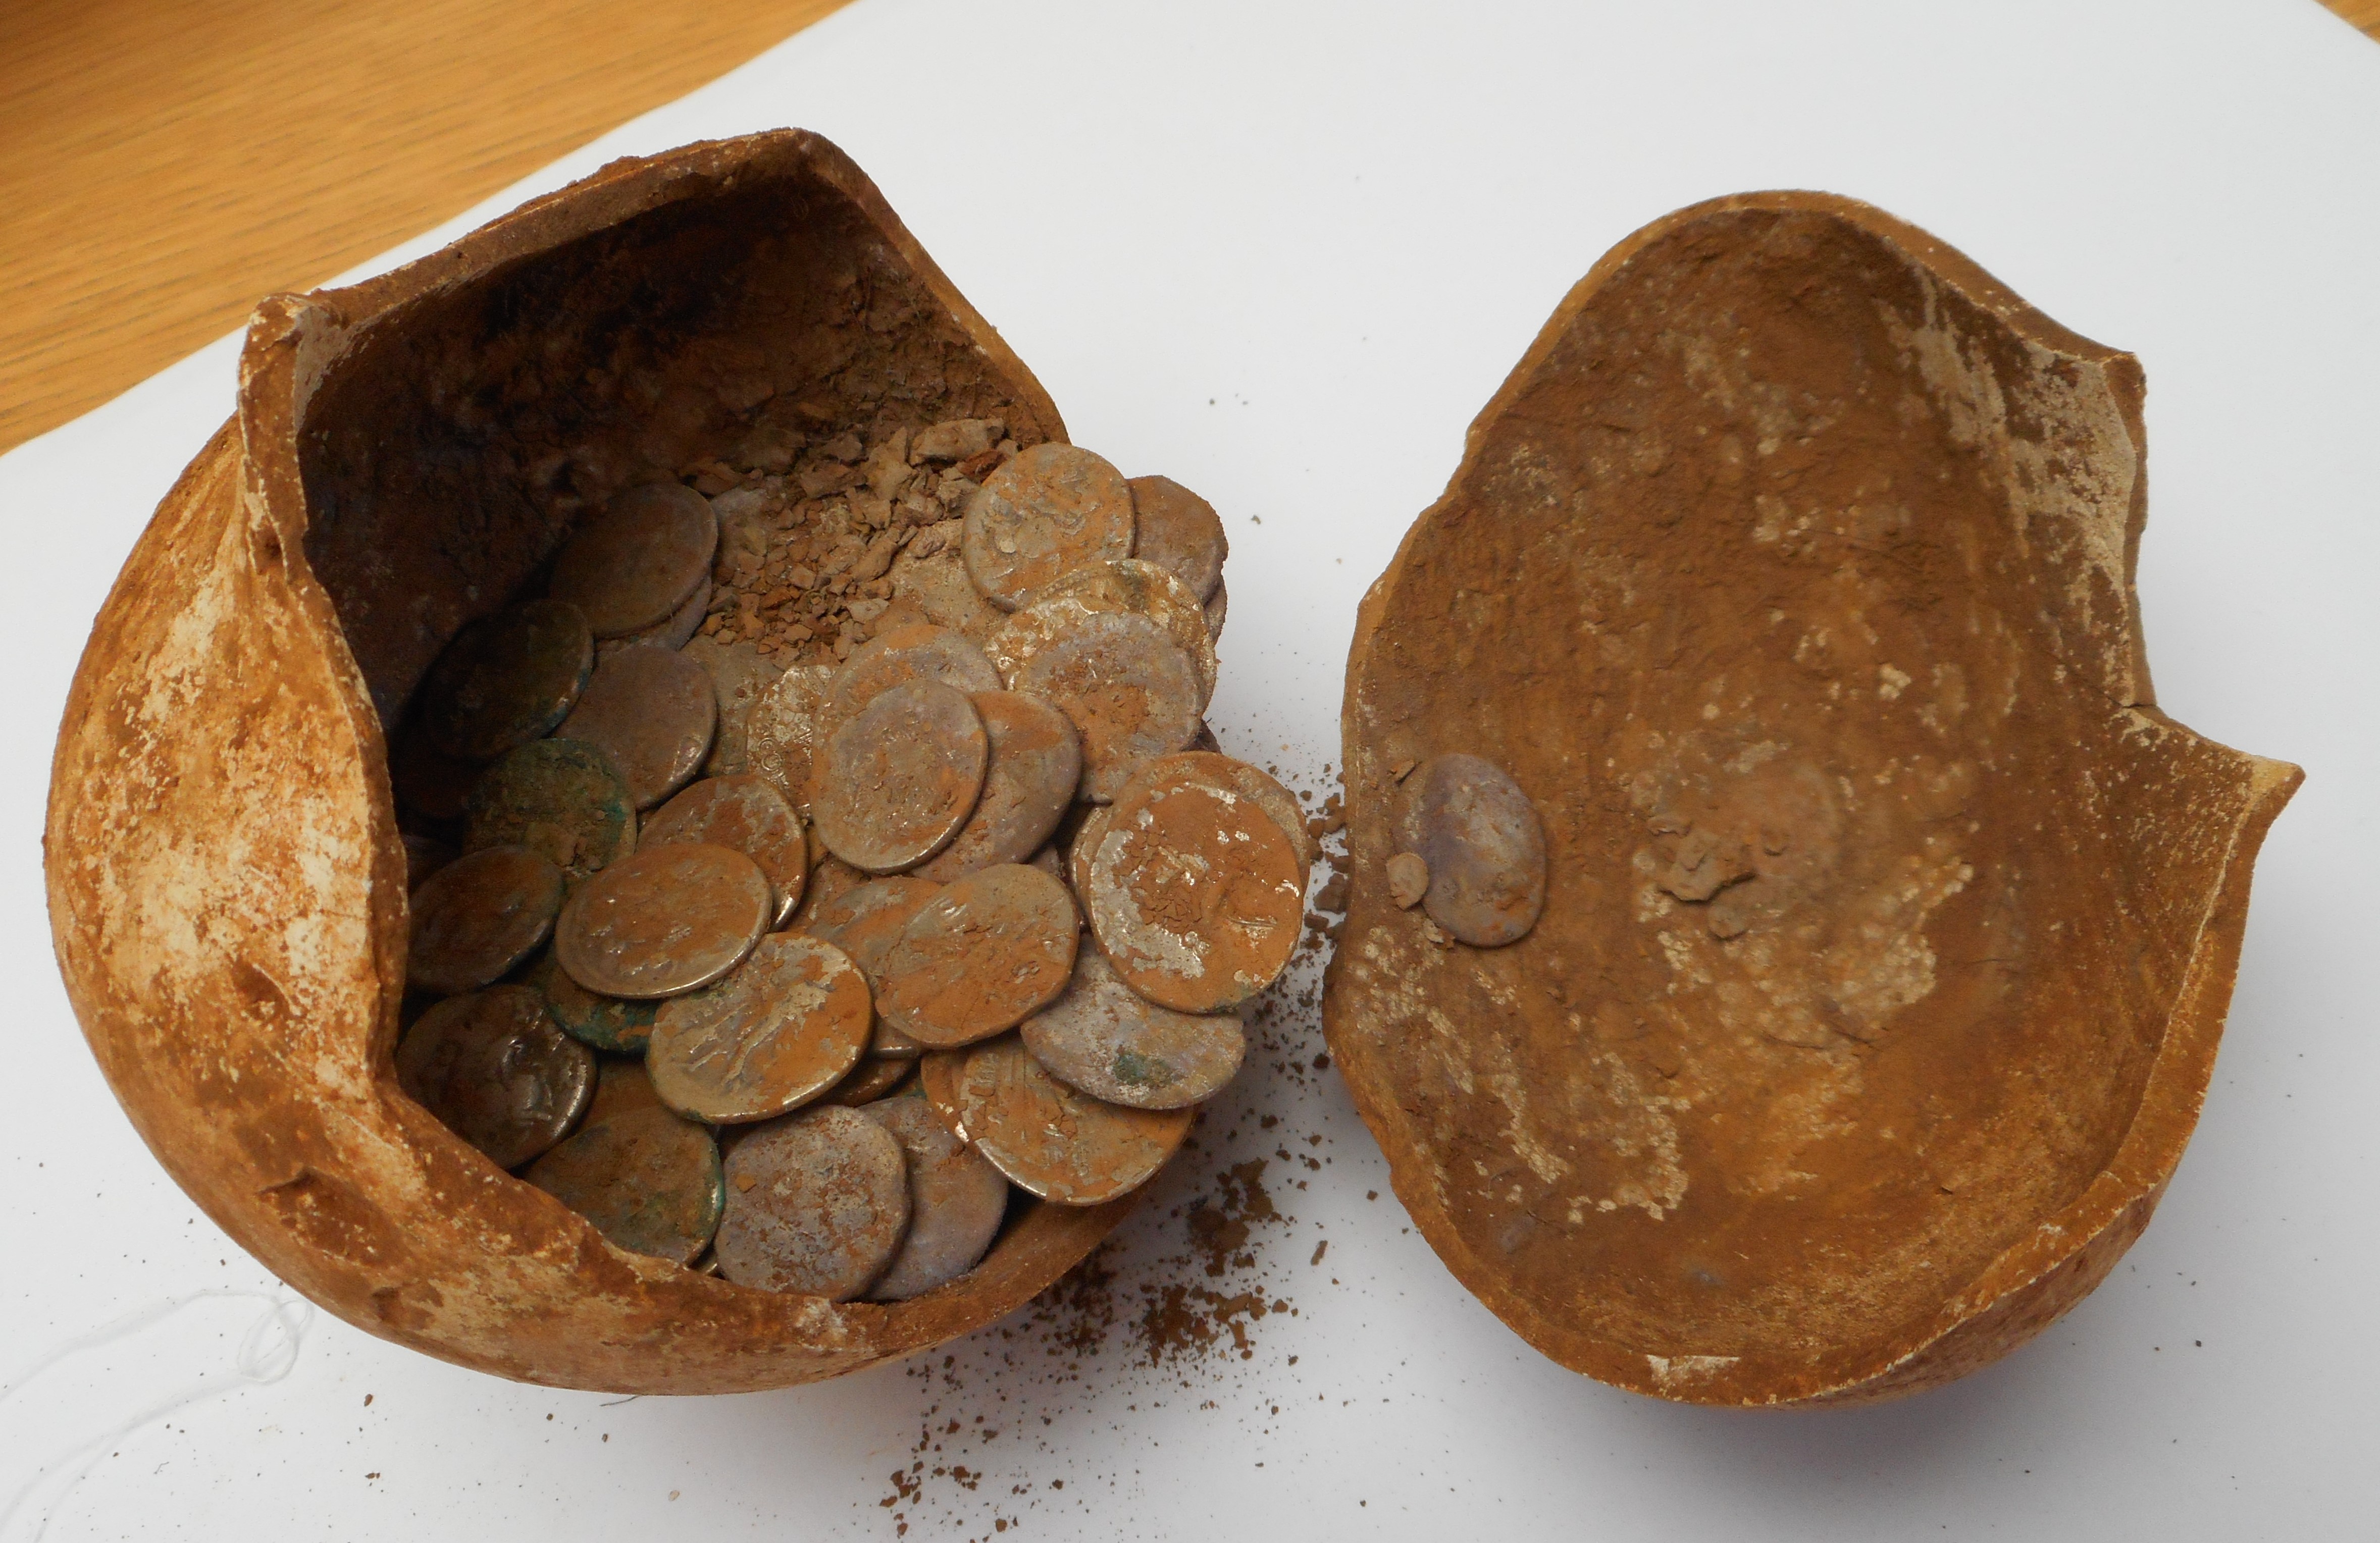 http://www.thehistoryblog.com/wp-content/uploads/2019/02/hoard-and-pot.jpg